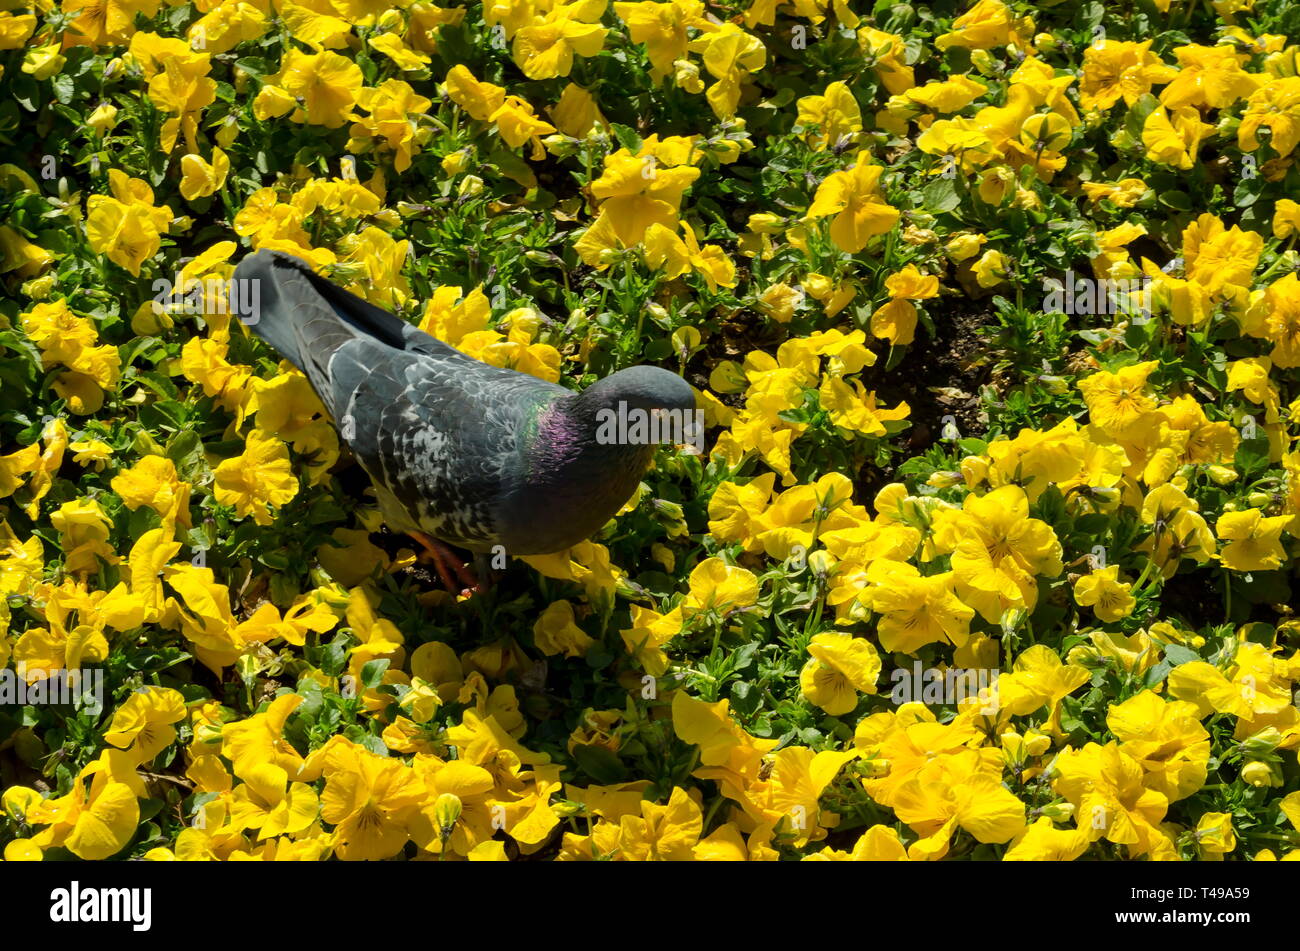 Natural background of spring blooming fragrant yellow pansies or Viola altaica and Pigeon, dove or Columba livia in garden, Sofia, Bulgaria Stock Photo